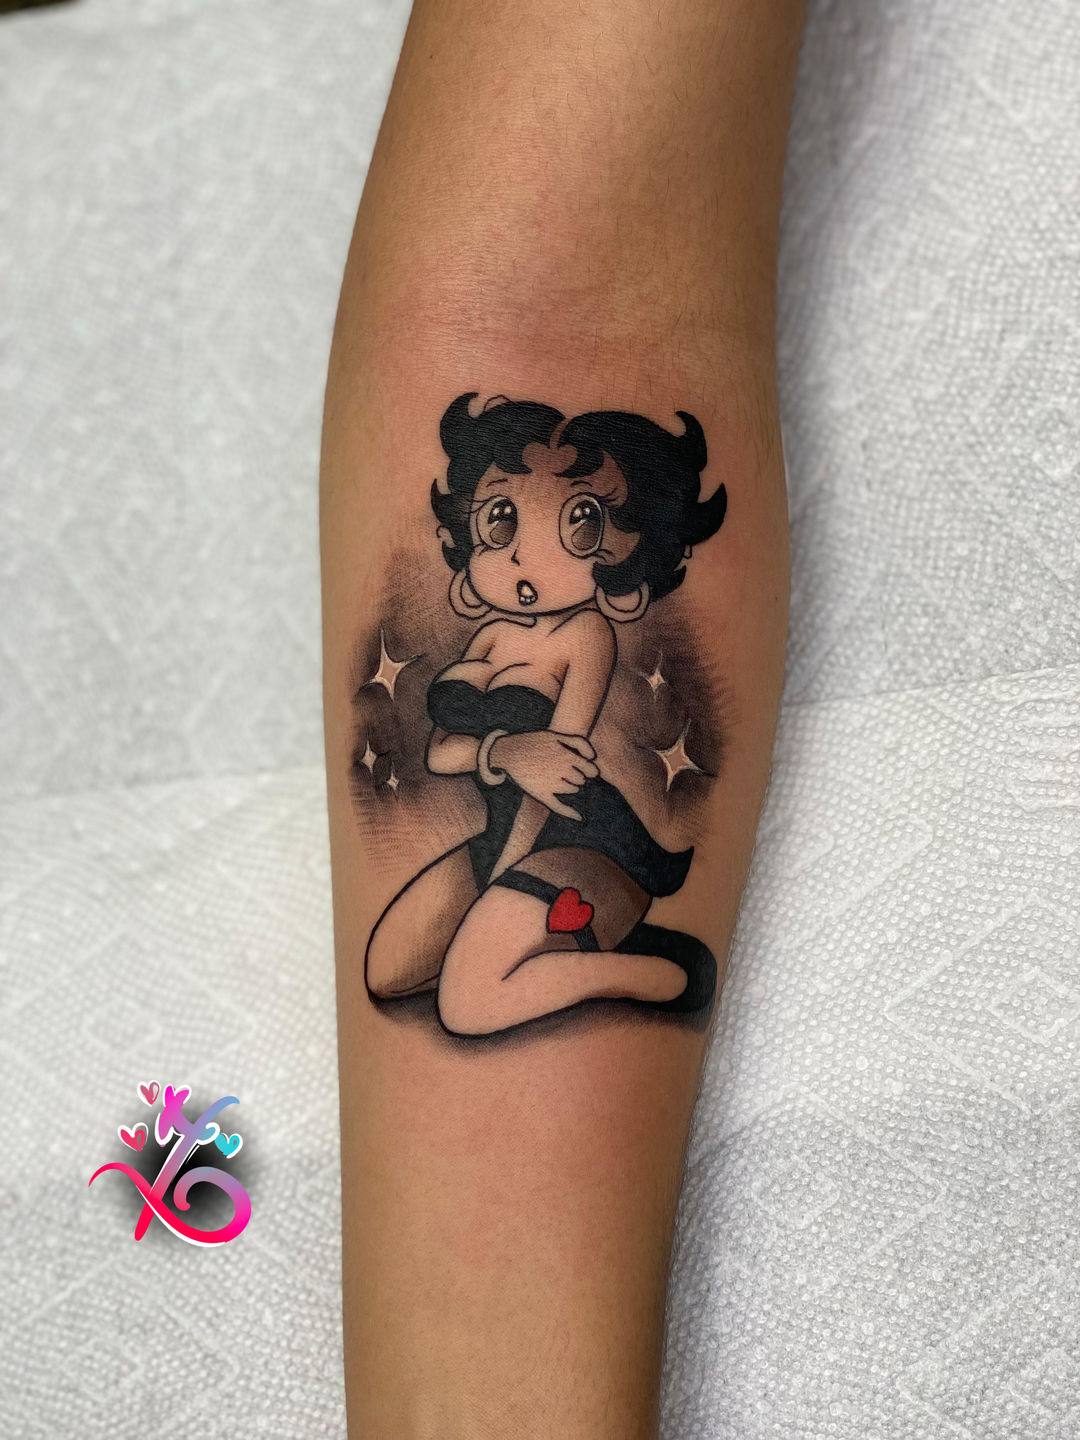 83 Betty Boop Tattoo ideas with Angel Wings Included  TattooGlee  Betty  boop tattoos Betty boop Star tattoo designs